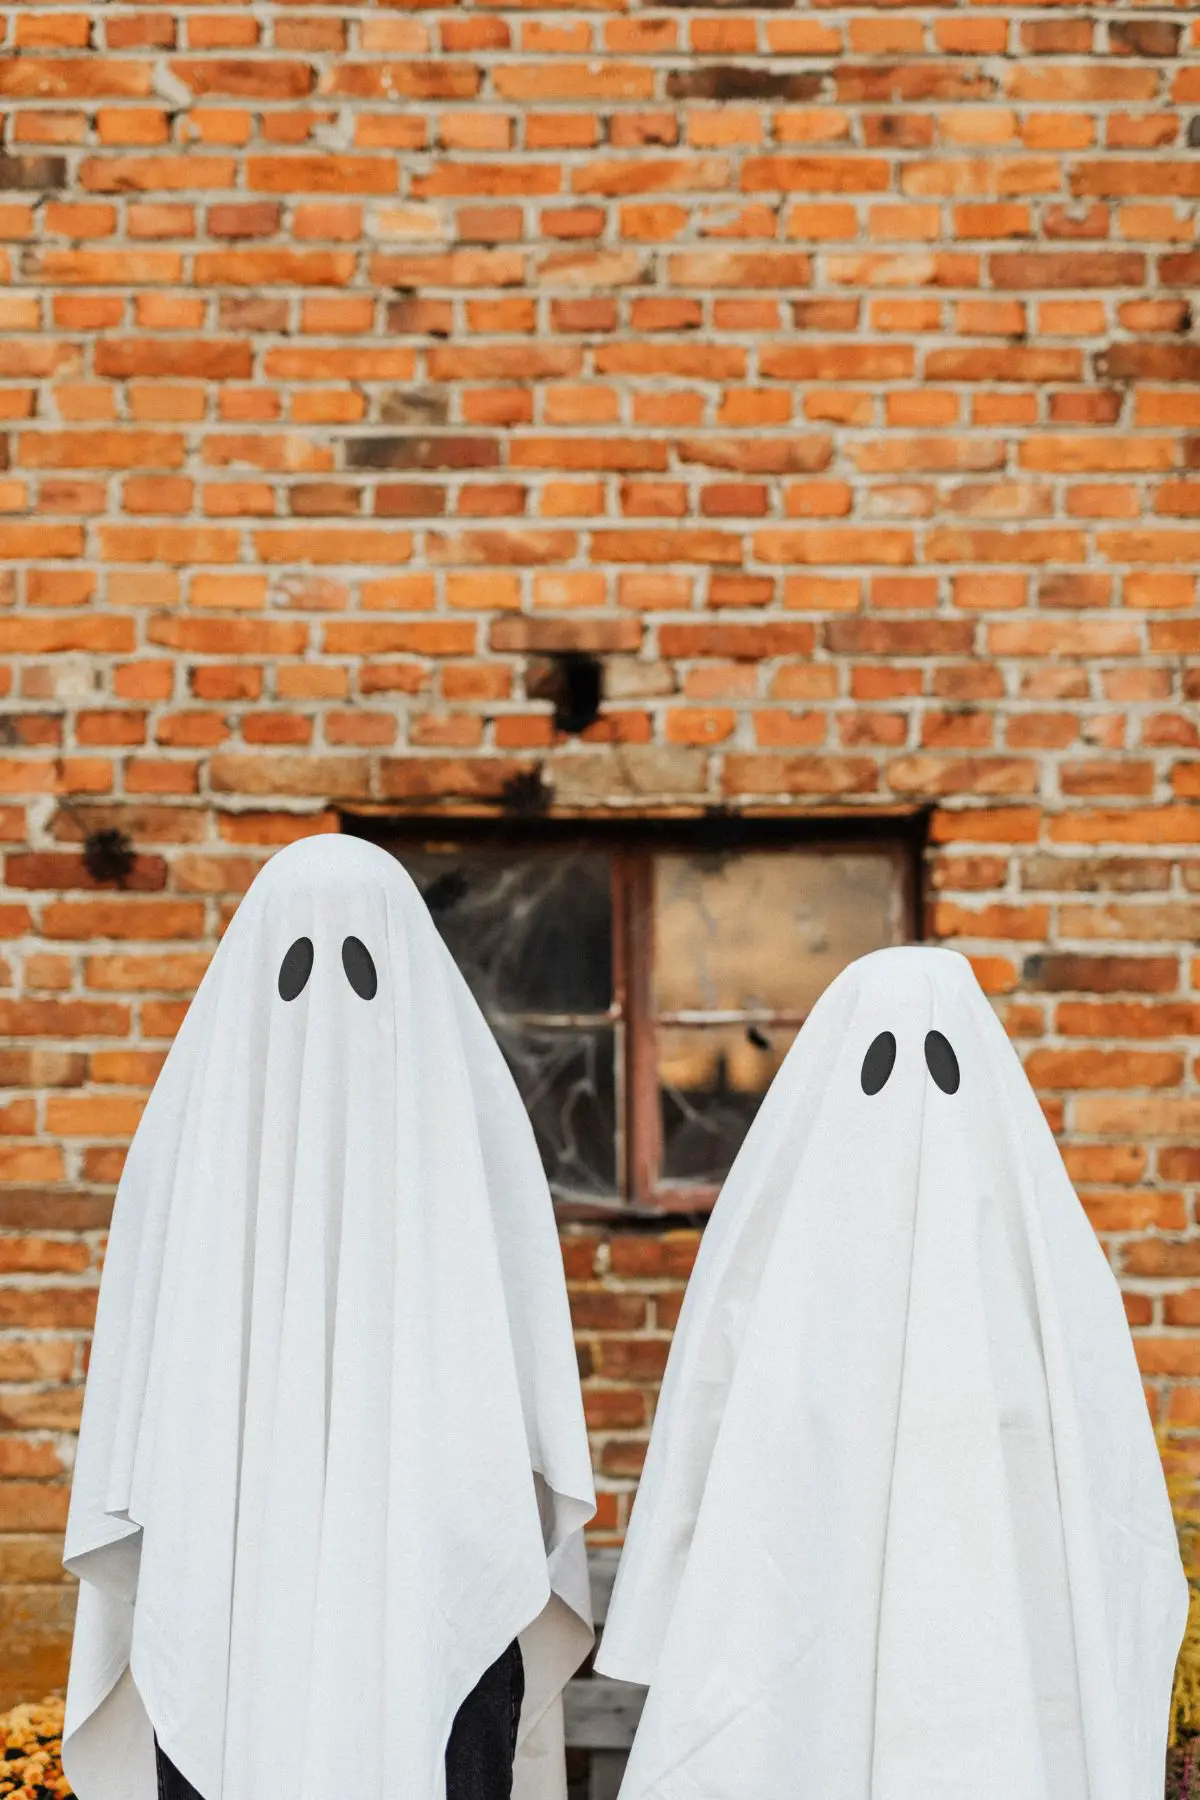 Two kids dressed as ghosts standing outside of a brick building.  